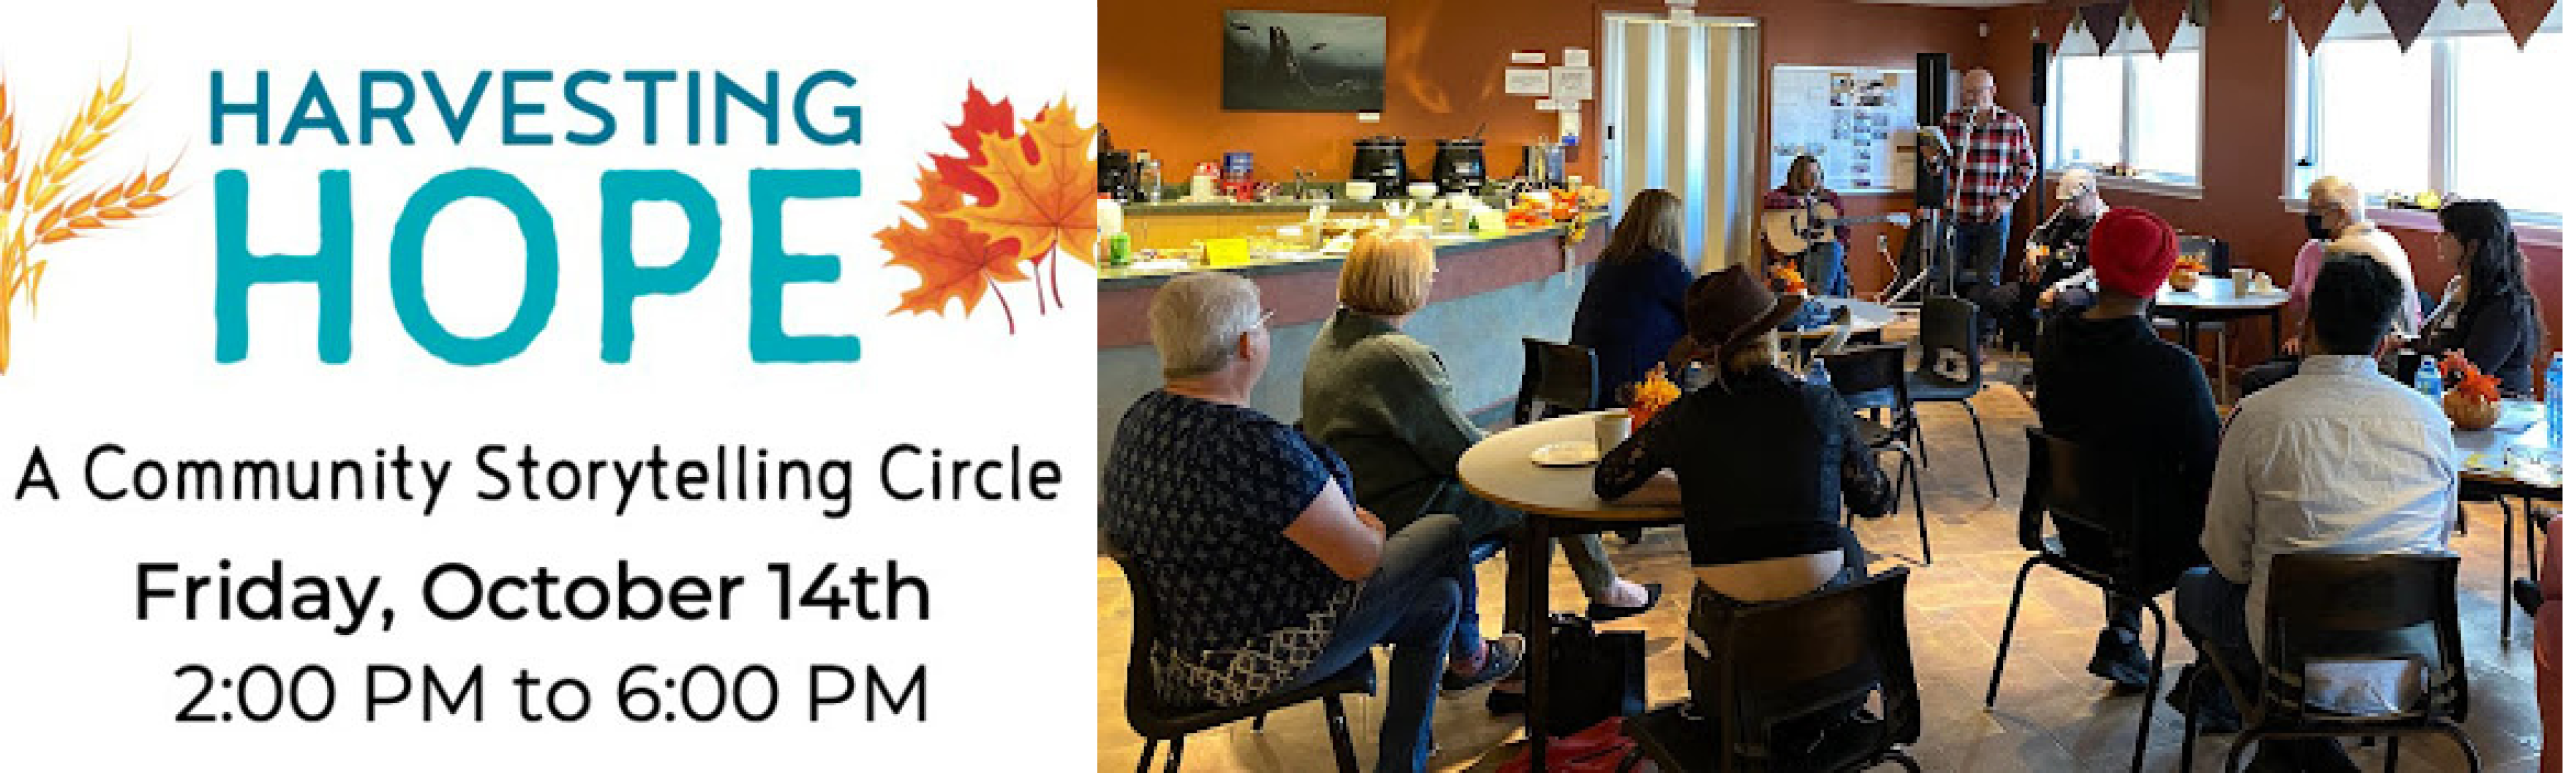 Harvesting Hope, A community storytelling Circle - logo for event in October, beside a photo of community members, back to, sitting around tables next to a cafe counter. At the front, A man stands at a mike, holding a book from which he is reading or singing and there is a guitarist on either side of him, seated.